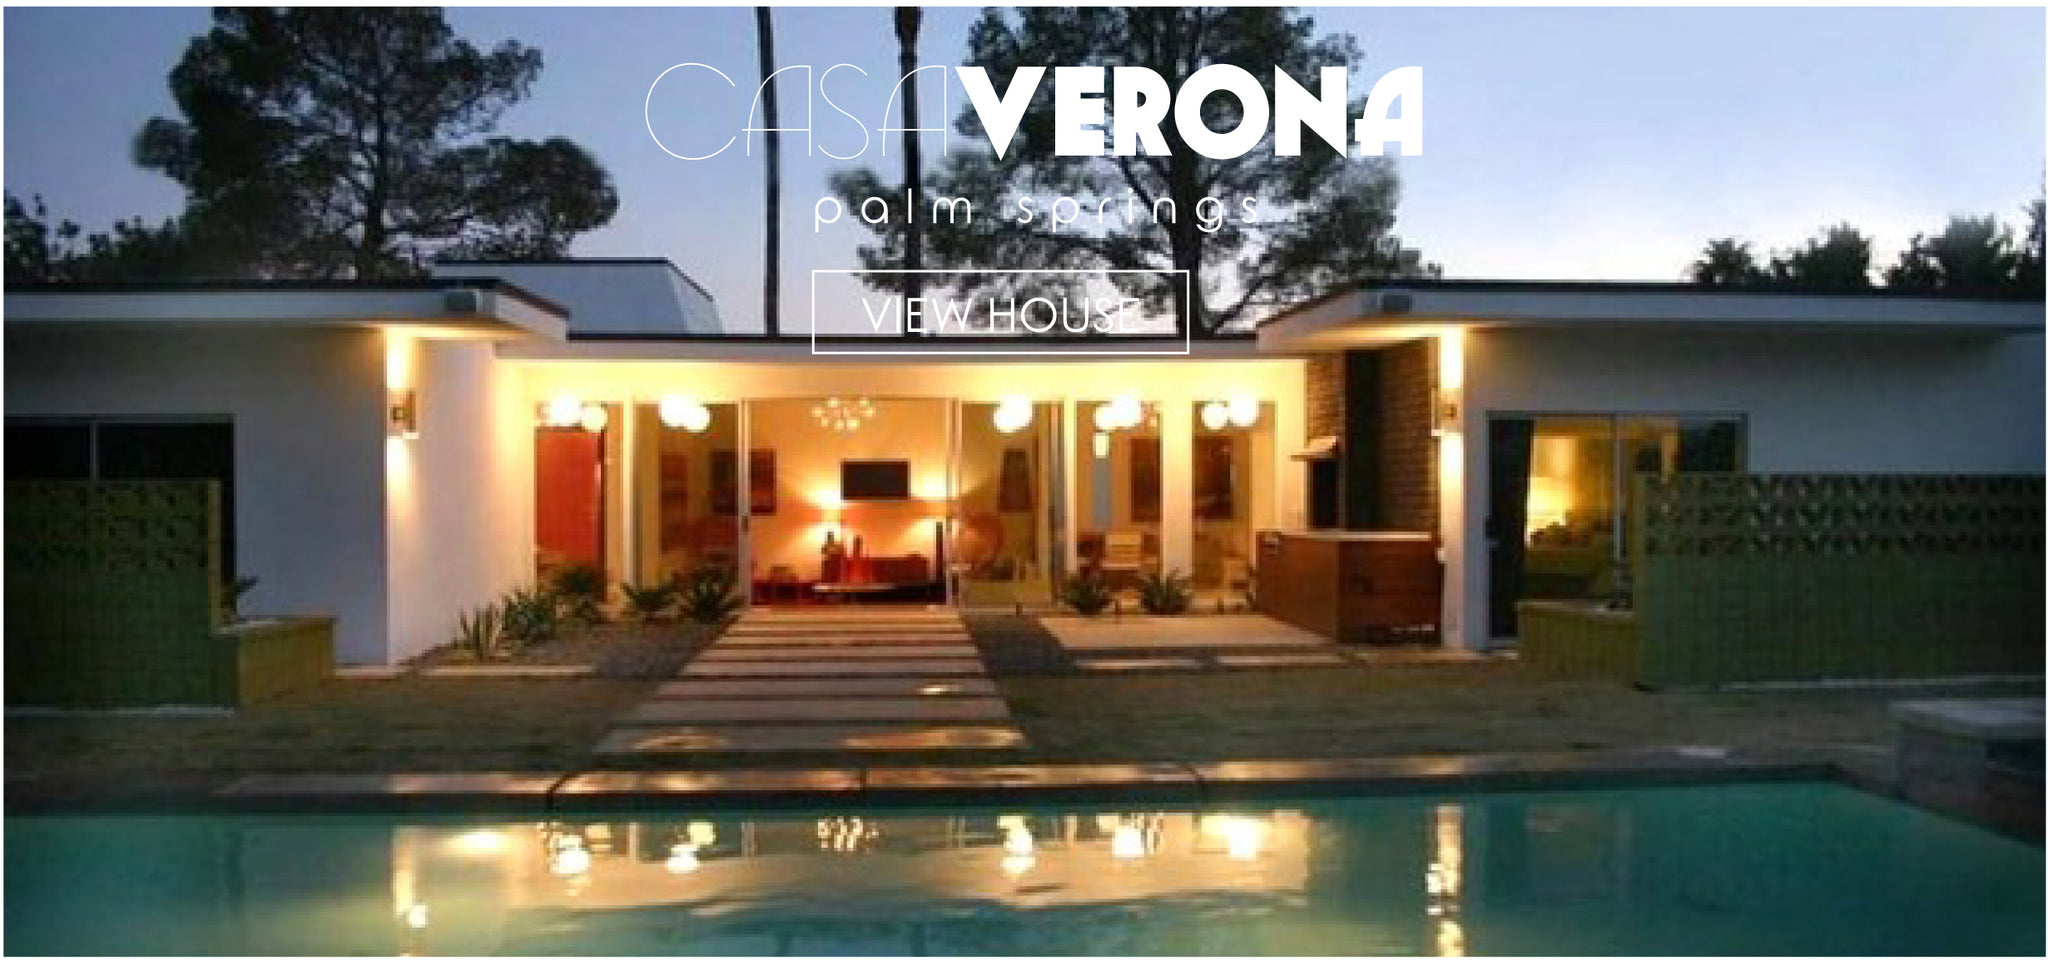 Modern-style, one-story home with pool, lit up at evening, 'Casa Verona Palm Springs' and 'View House' in white print overlay